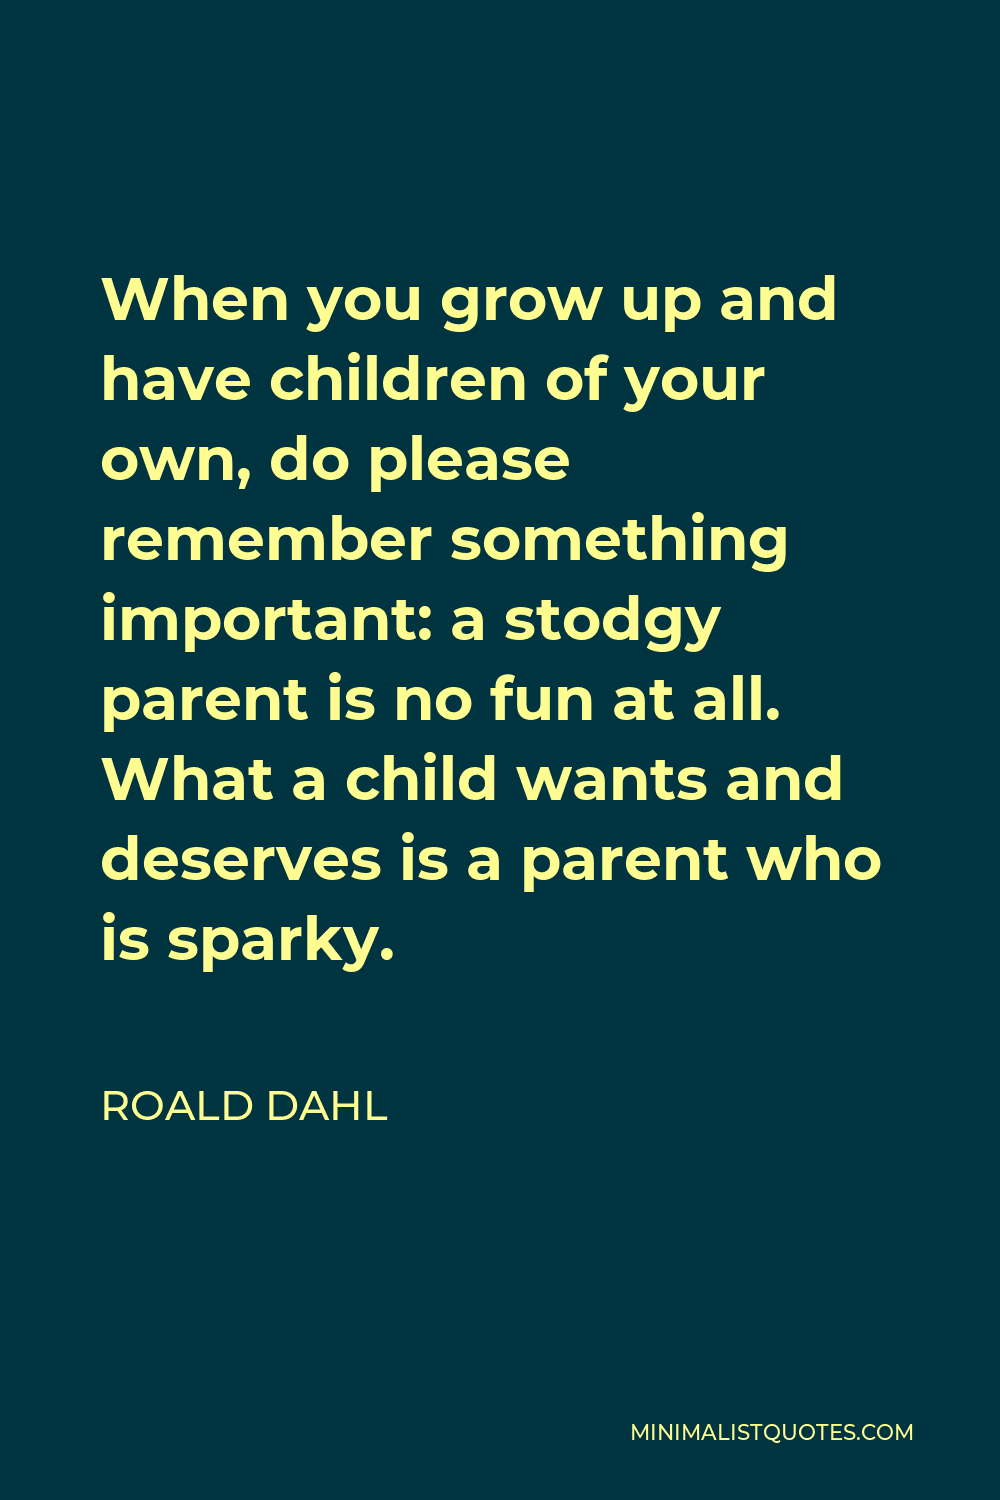 Roald Dahl Quote: “Life is more fun if you play games.”